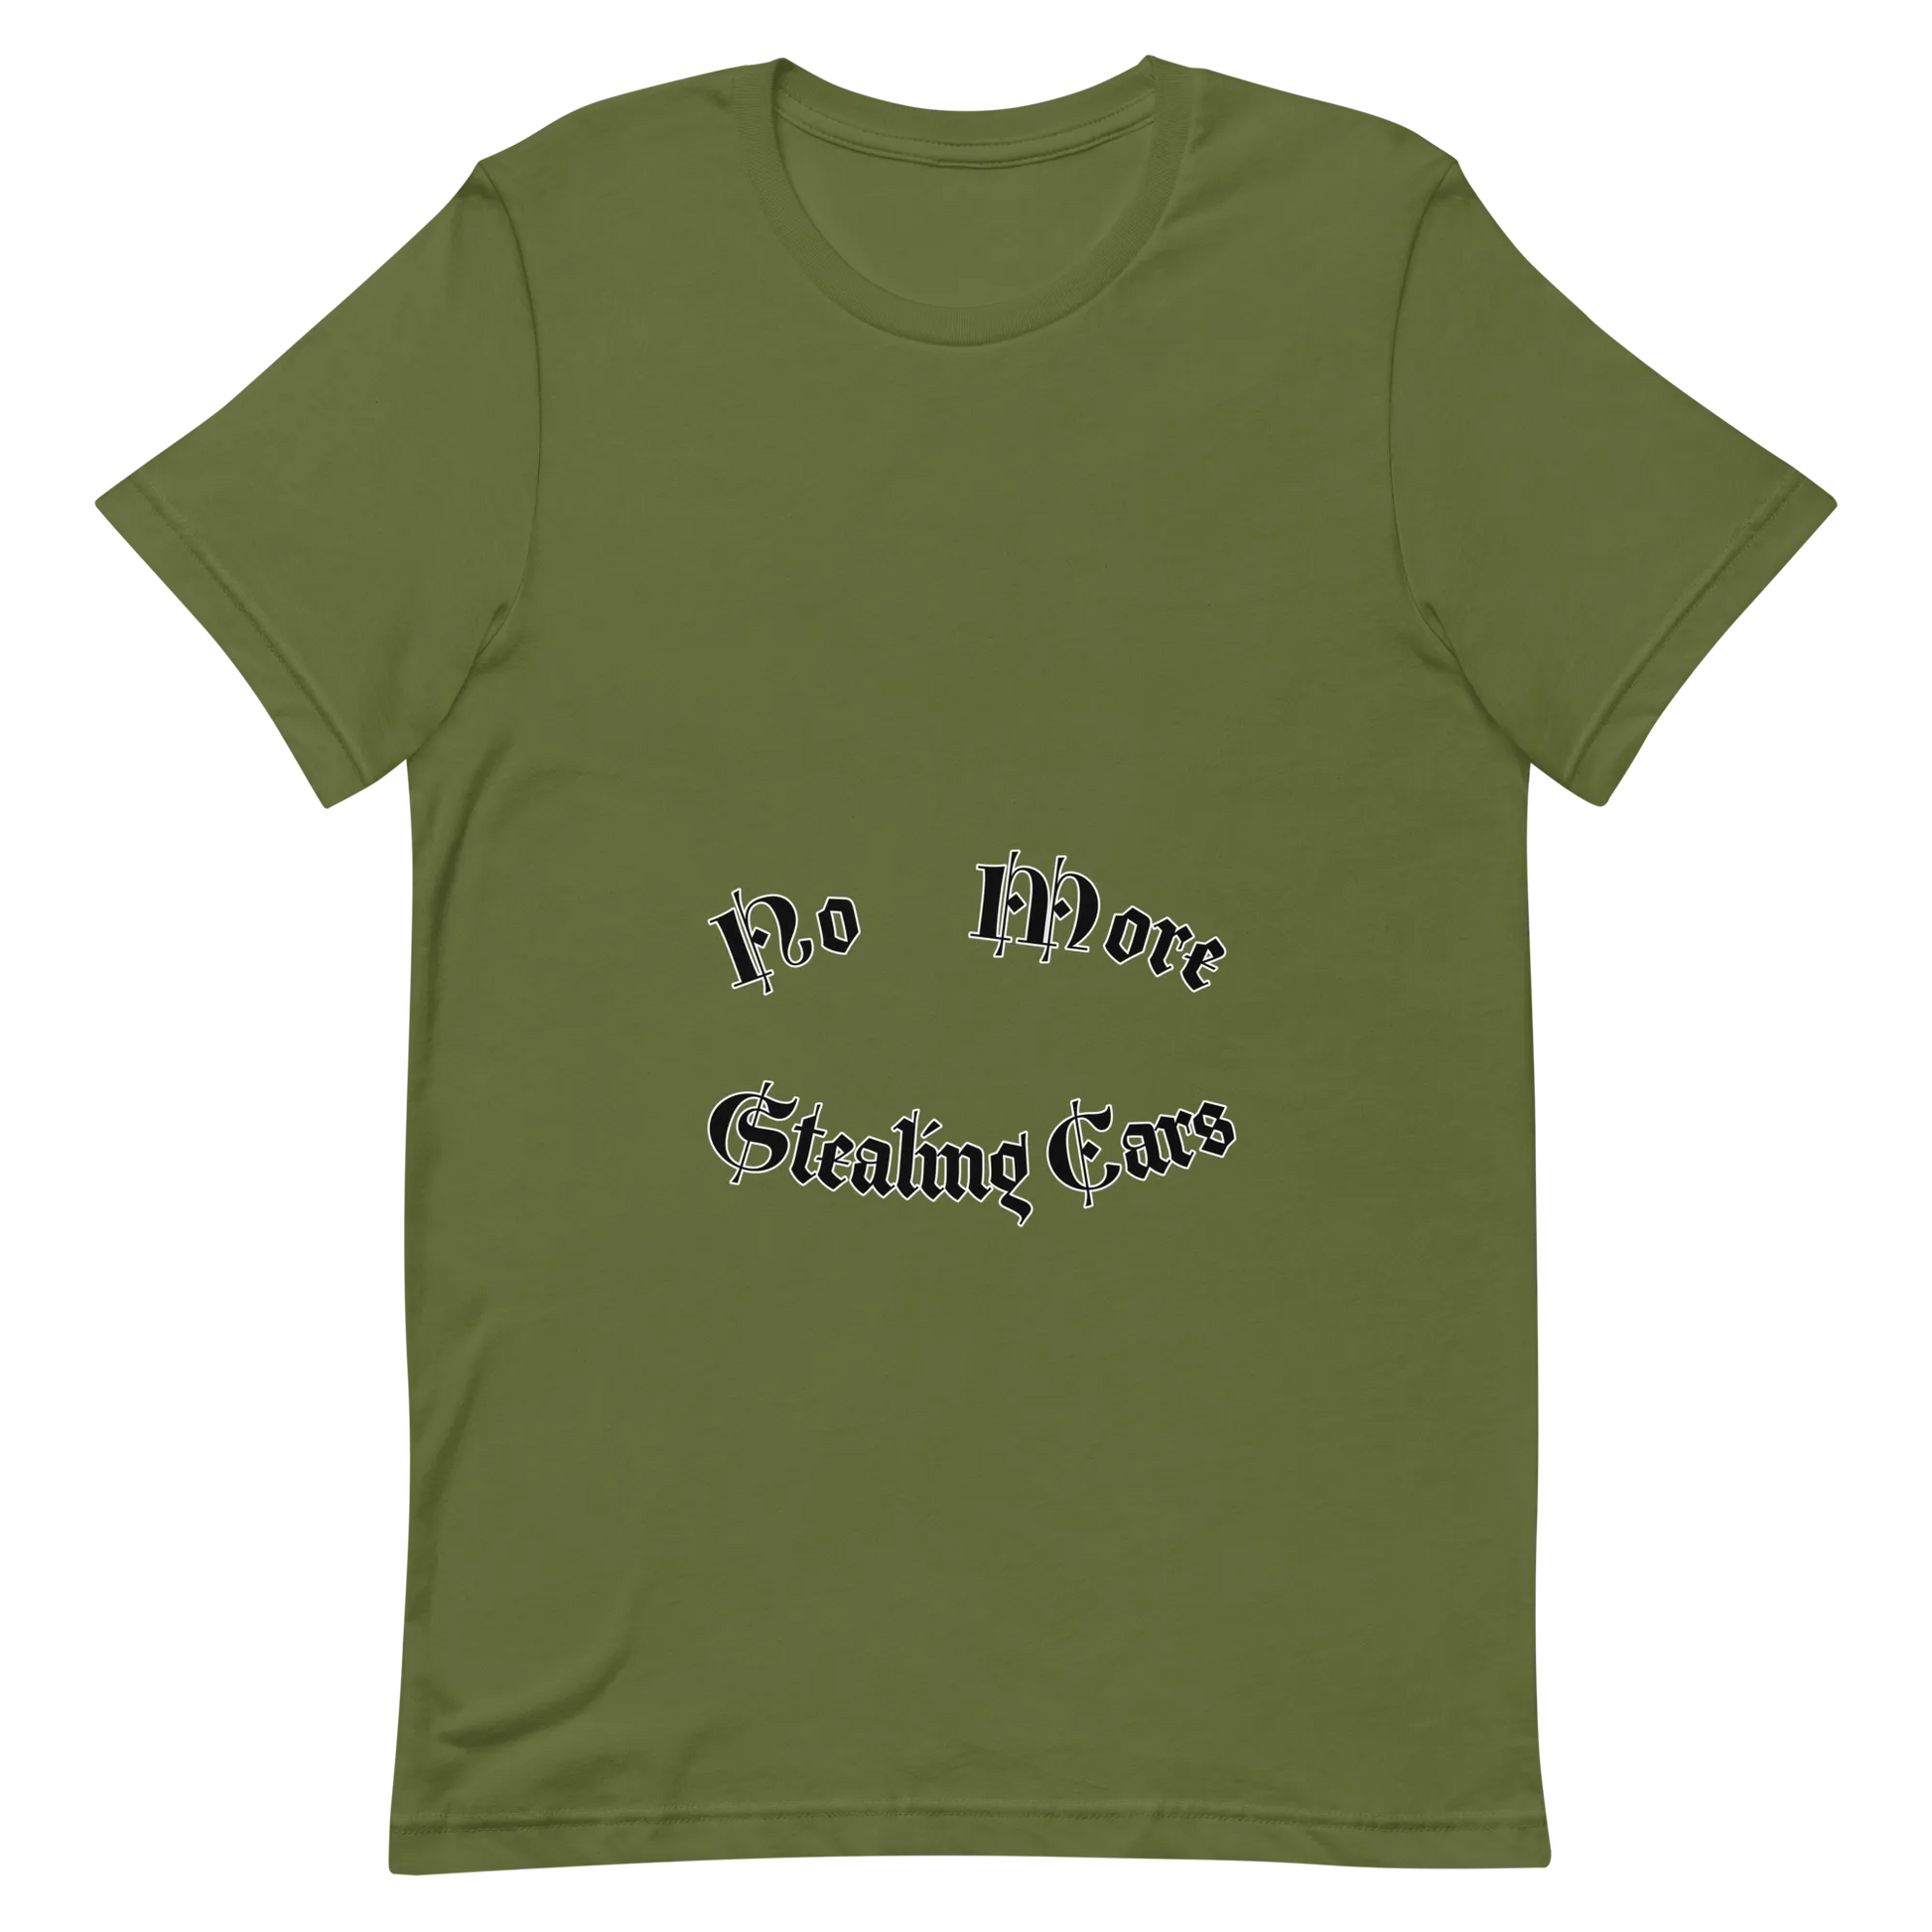 No More Stealing Cars Tee in Olive flatlay